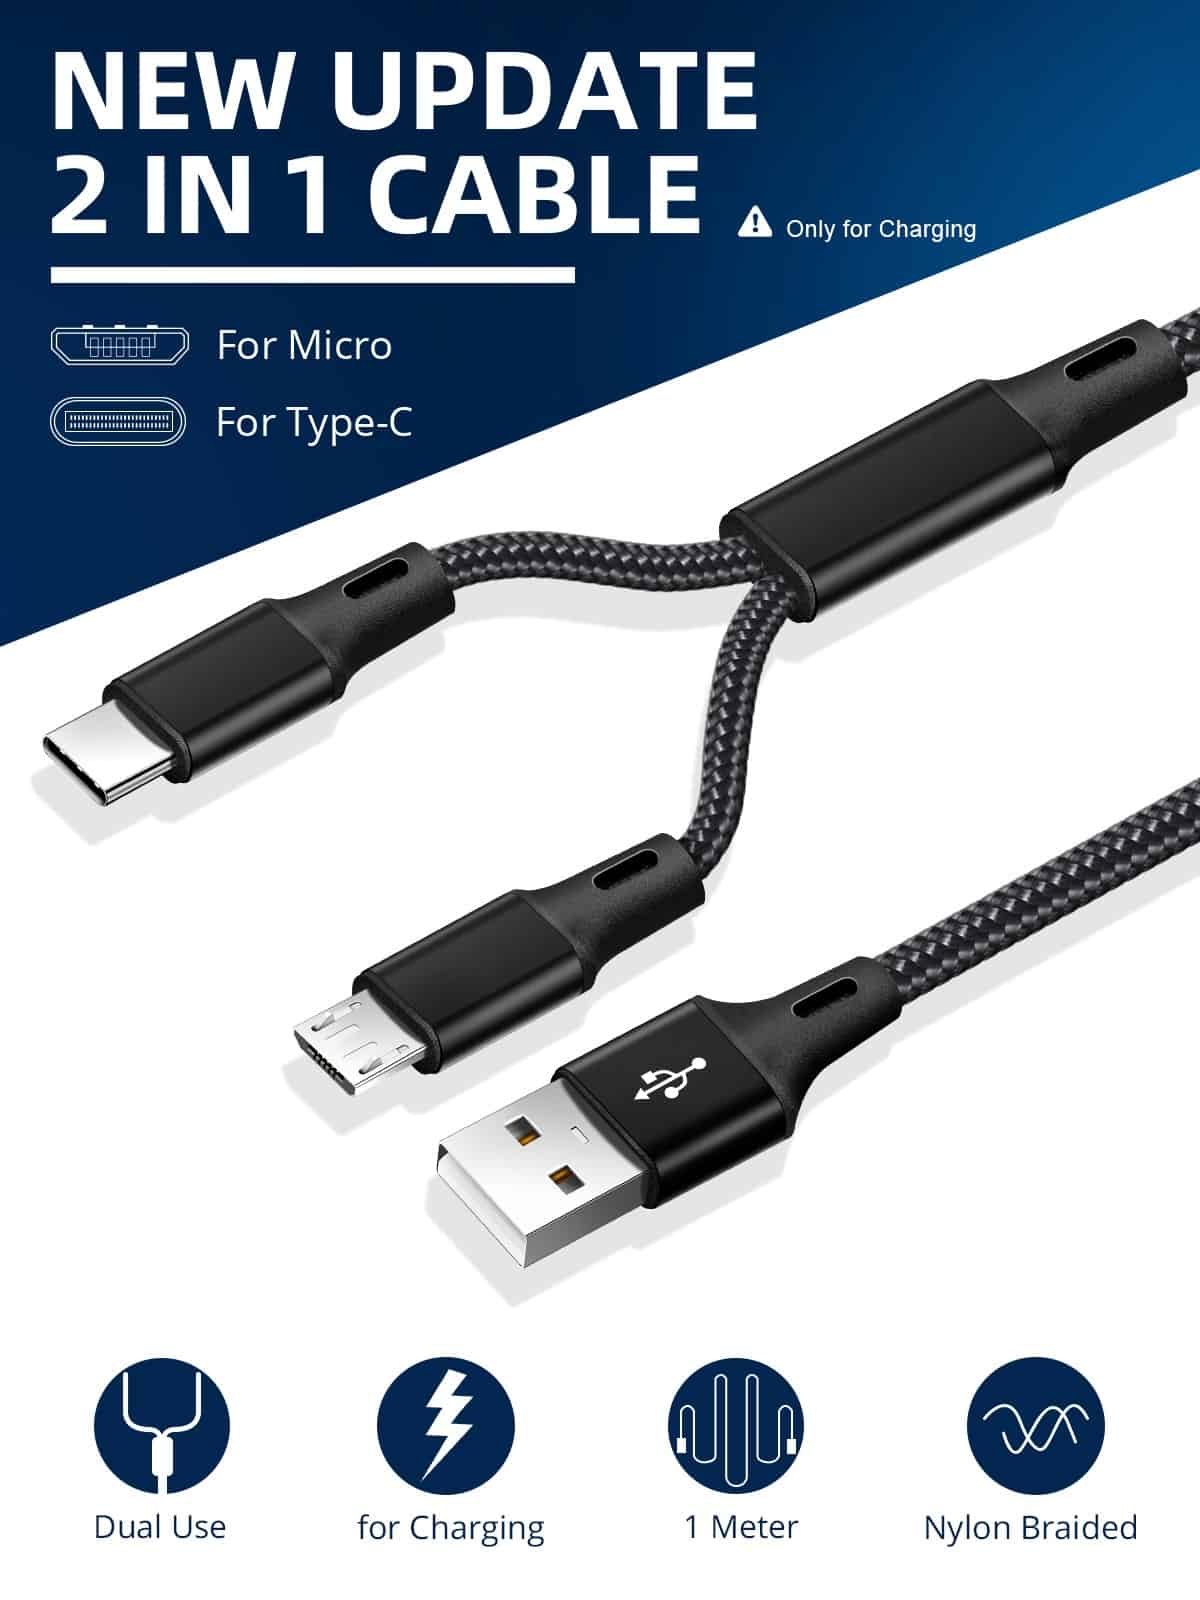 FONKEN 2 in 1 Micro USB Cable Type C Cables Fast Charge Charger Cable Tablet Phone Charge Cord 2in1 Nylon Braided Android Wires